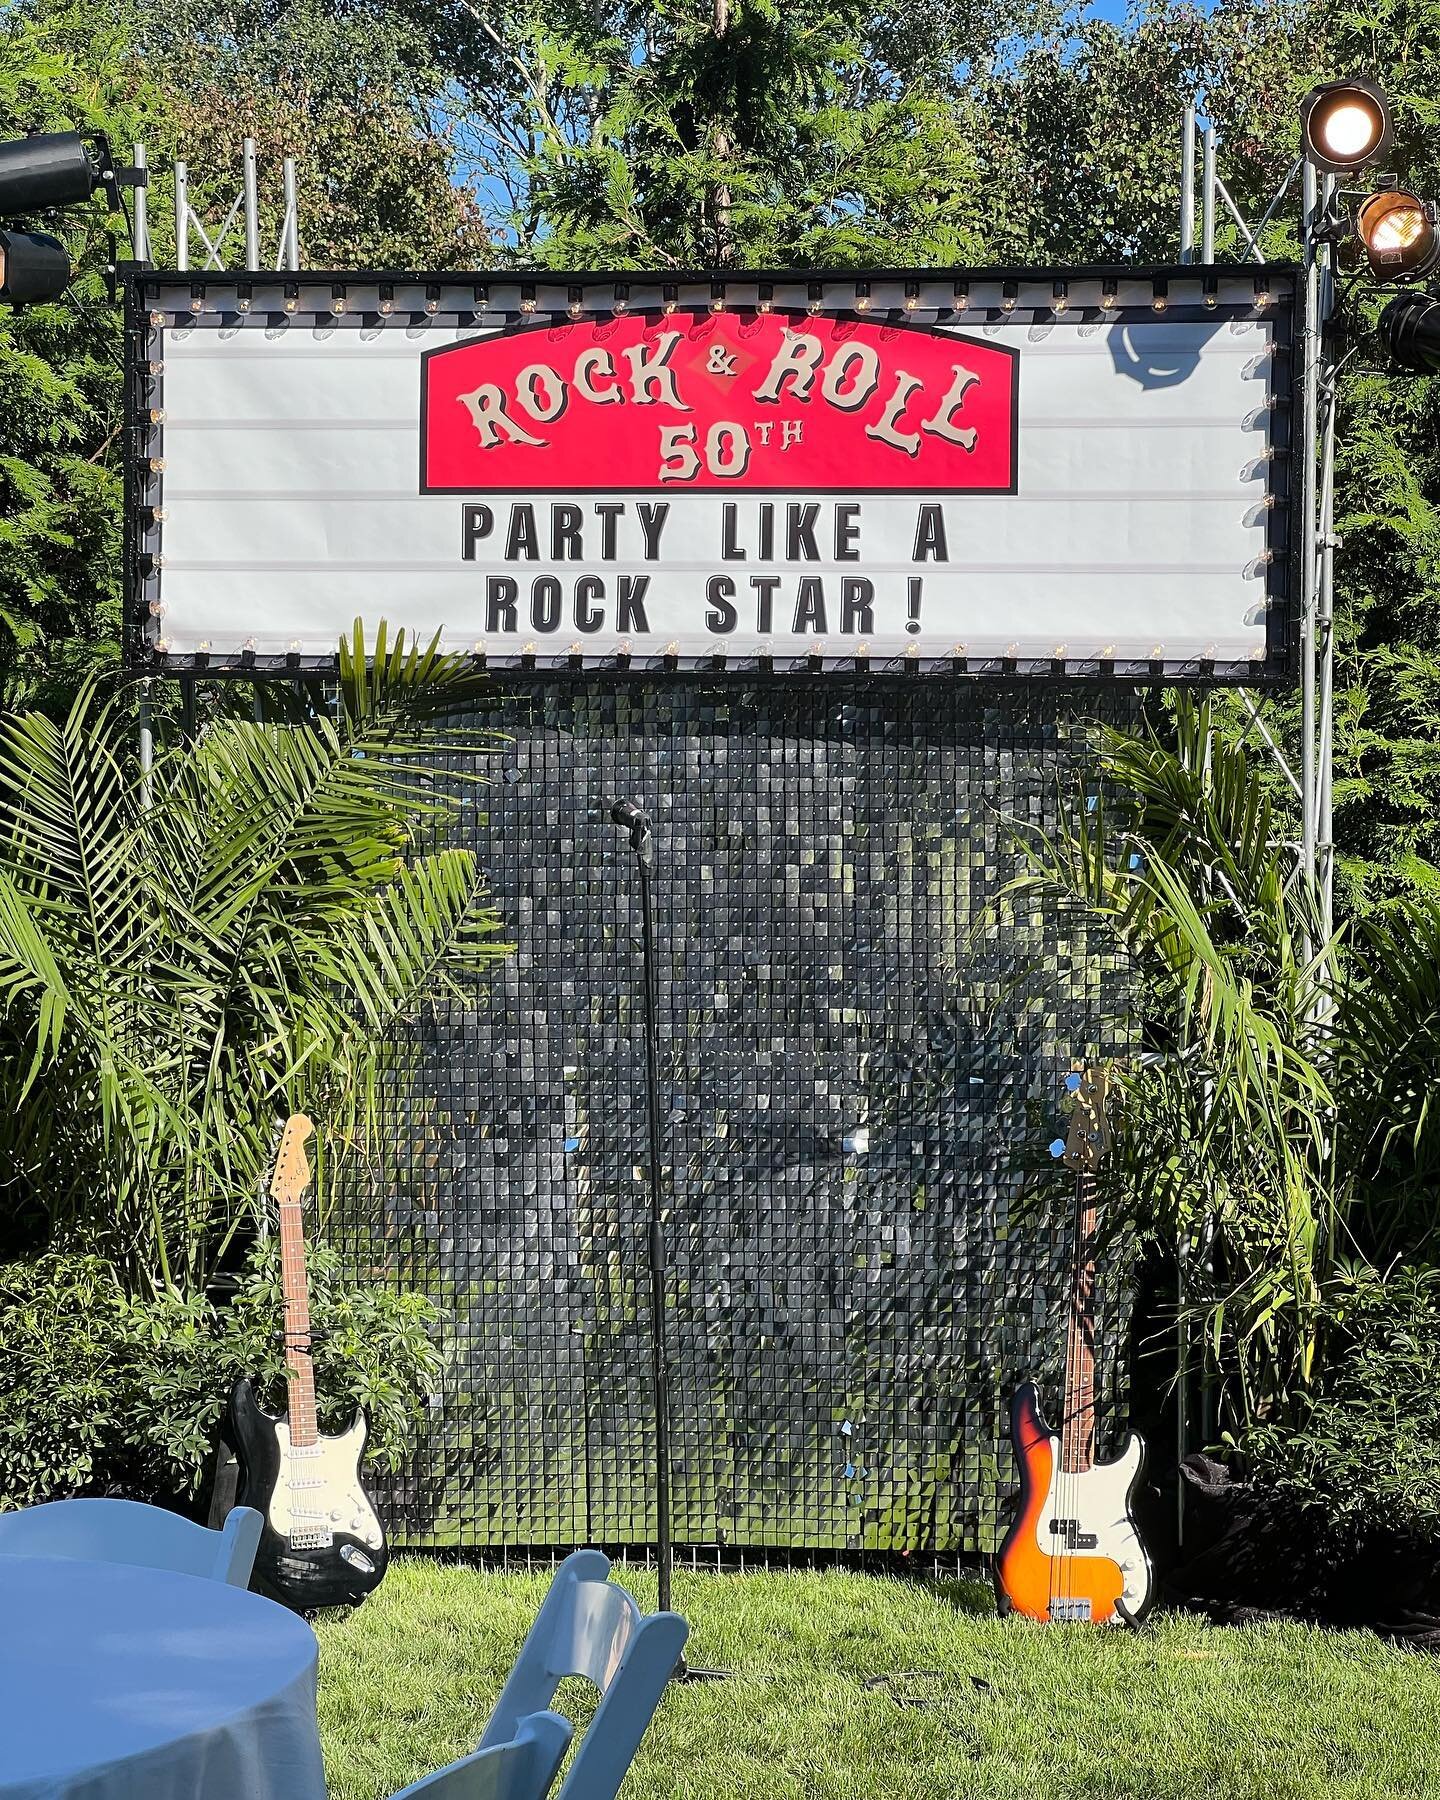 This 50th birthday party we decorated this weekend totally rocked! As usual our team brought the theme of vinyl and classic rock to every element of the event. 
Some of our favorite parts were the awesome photo backdrop with an incredible wig bar, vi